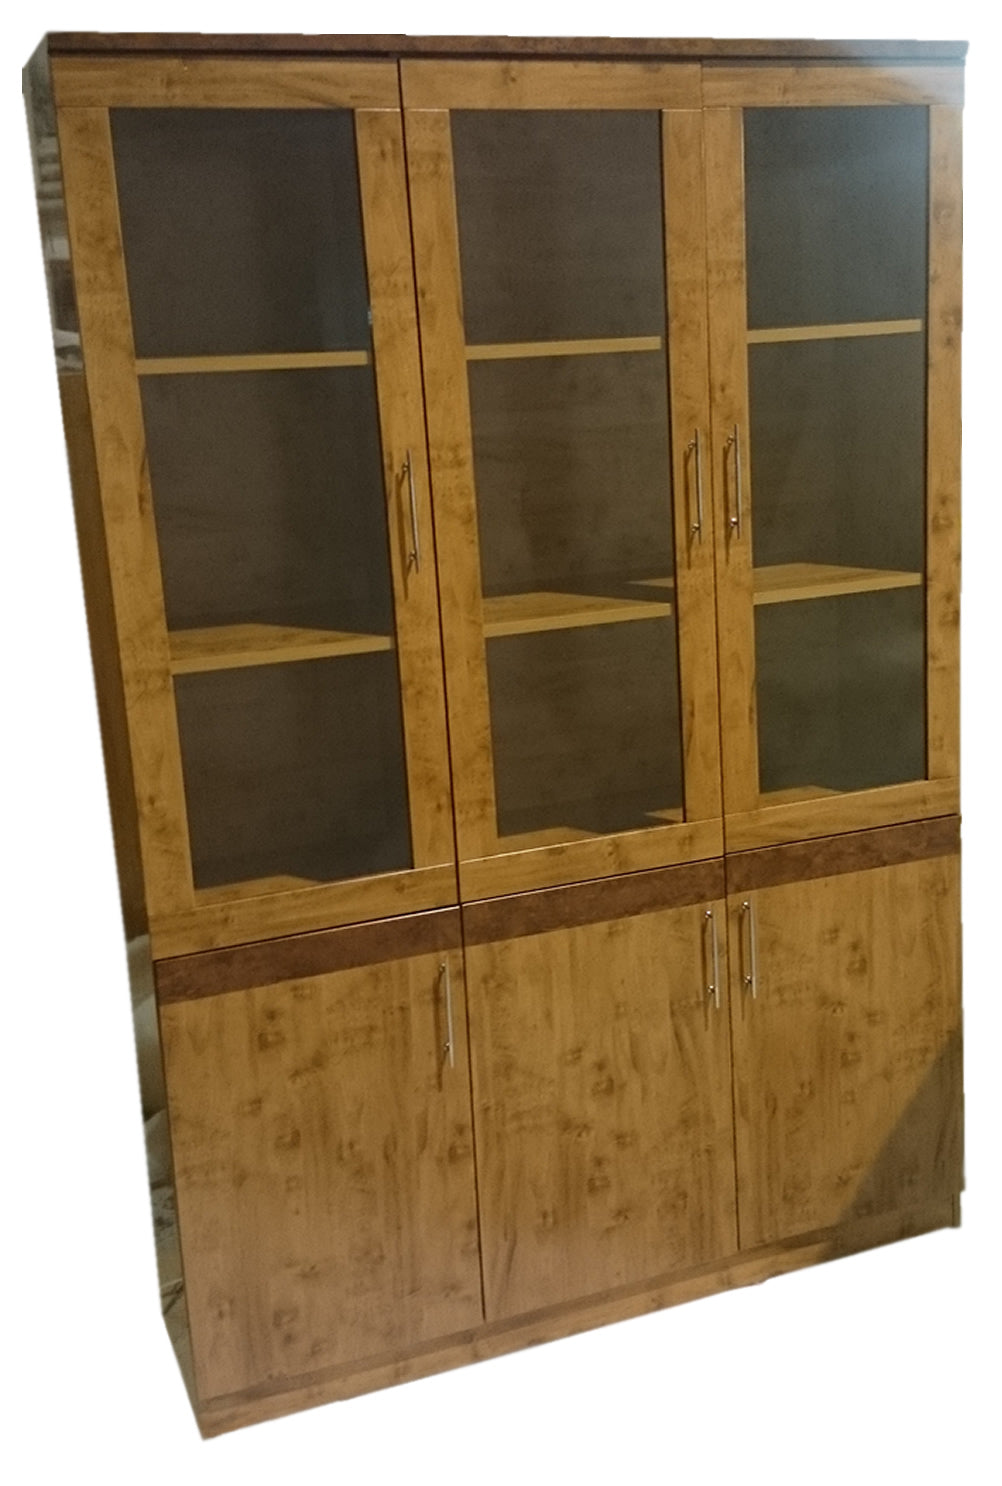 Yew Luxury Bookcase 3 Doors Wide DES-1862-192A-3DR North Yorkshire